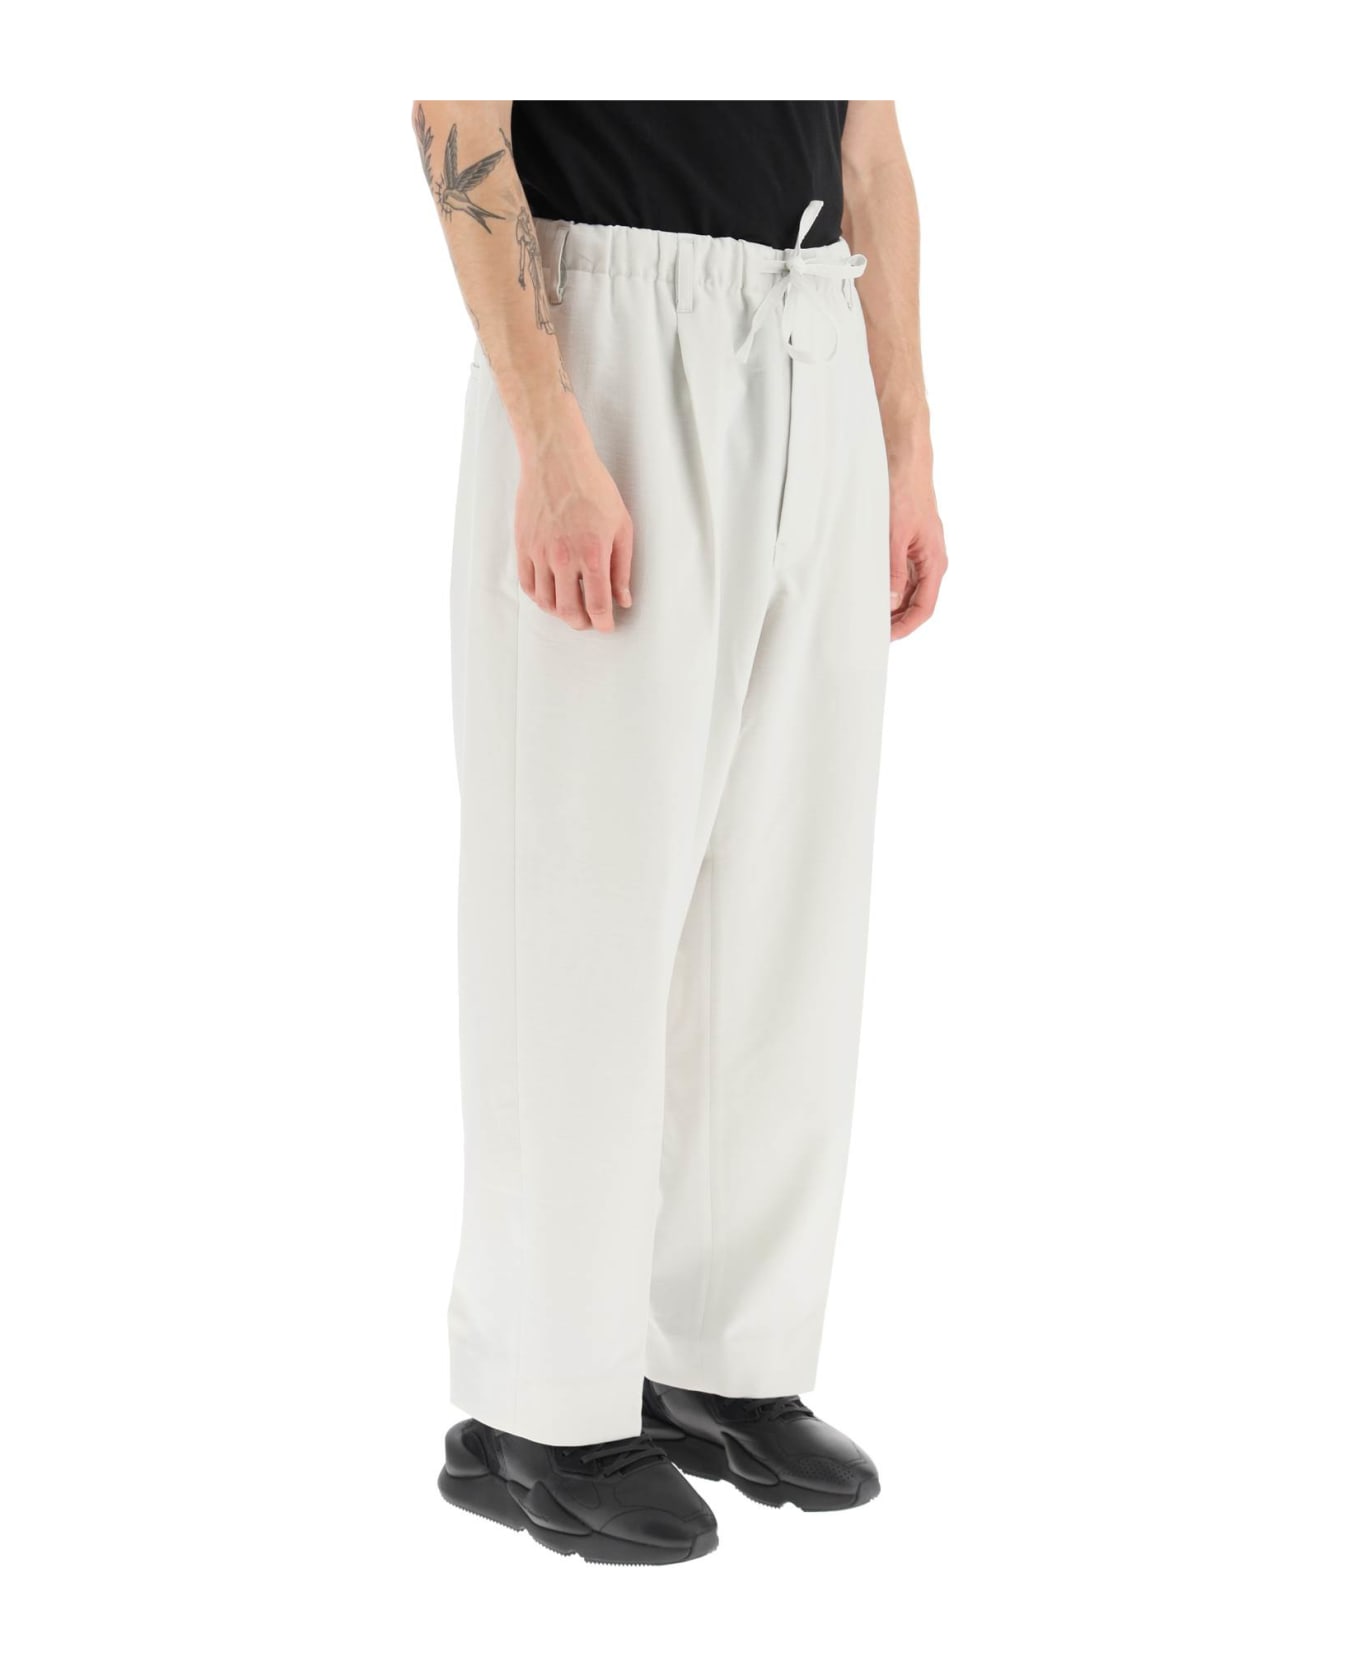 Y-3 Lightweight Twill Pants With Side Stripes - ORBIT GREY (White) ボトムス